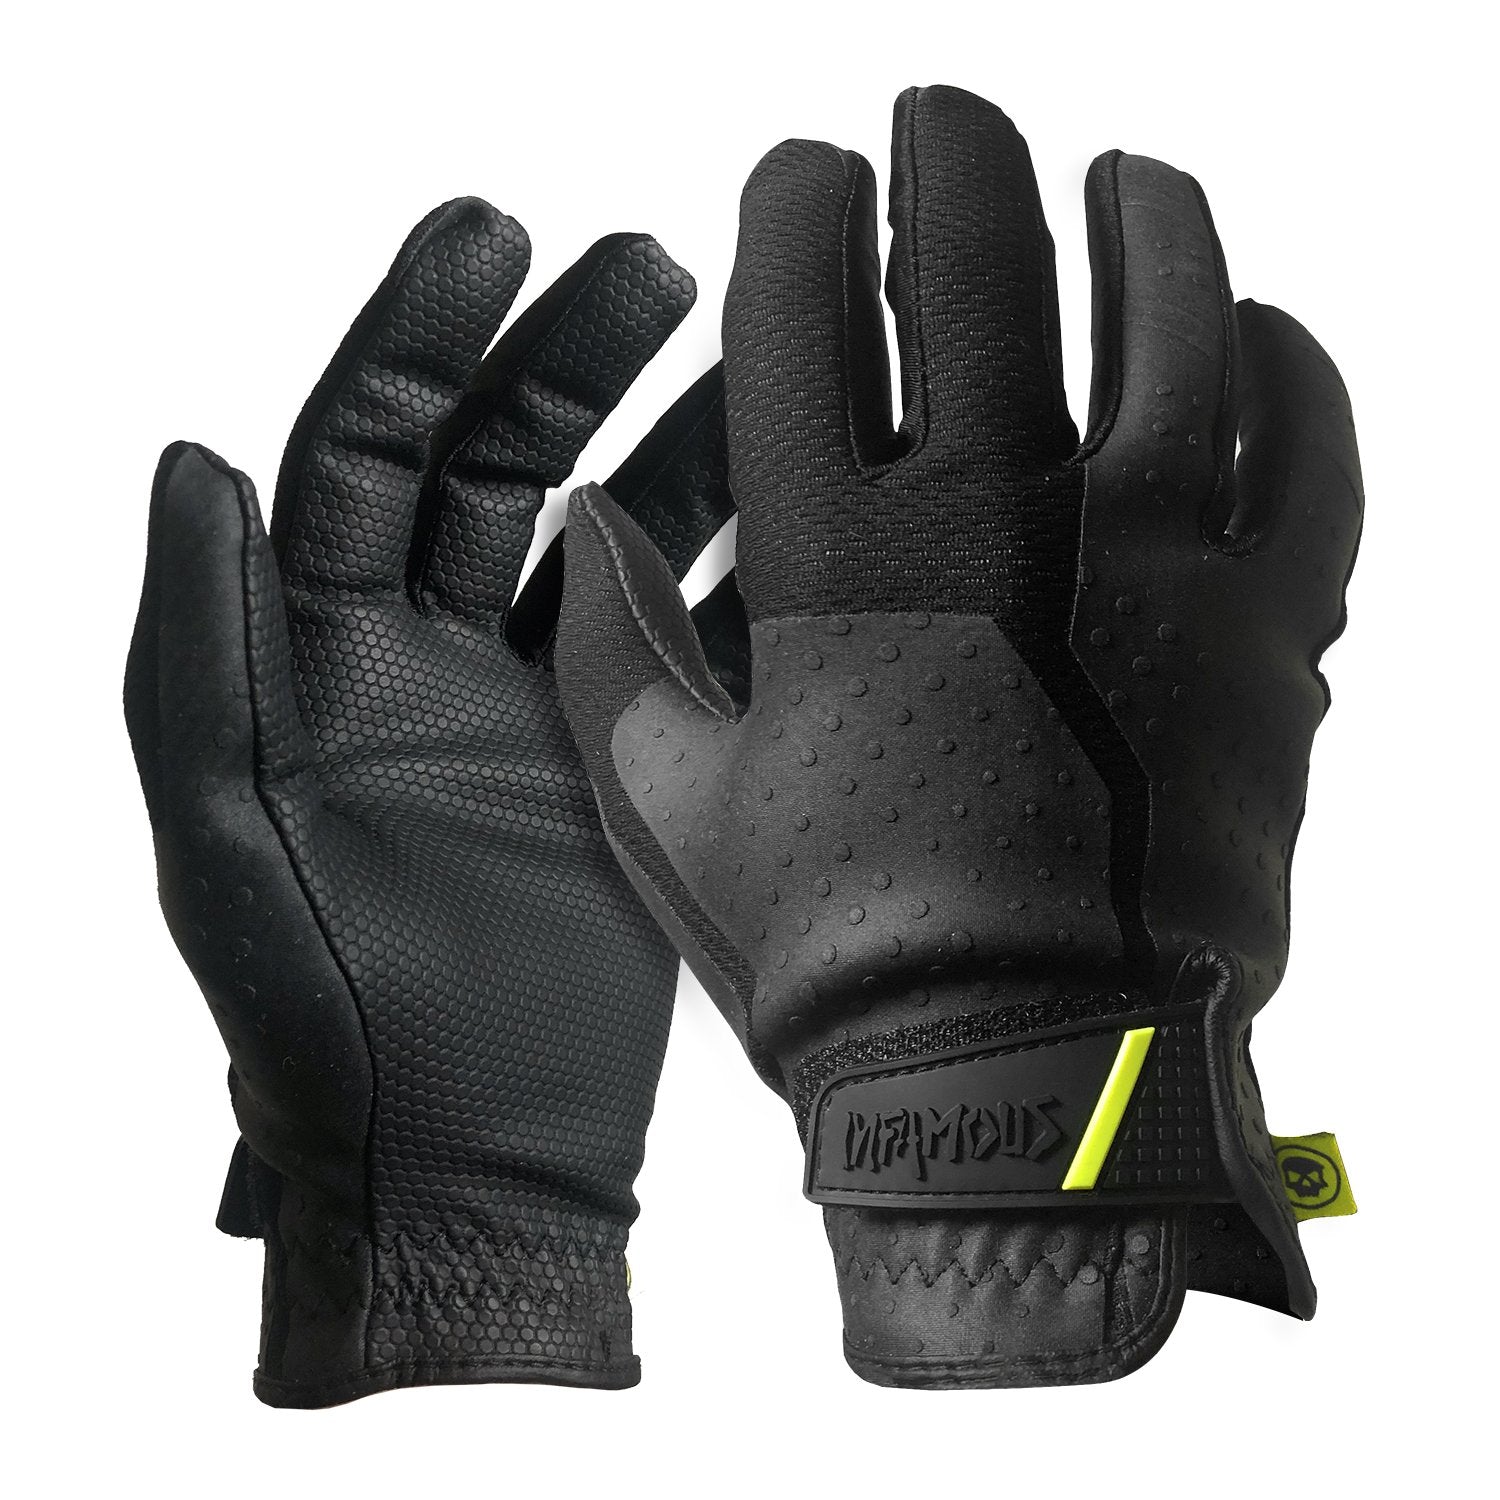 Infamous PRO DNA Sicario Gloves - Small - Infamous